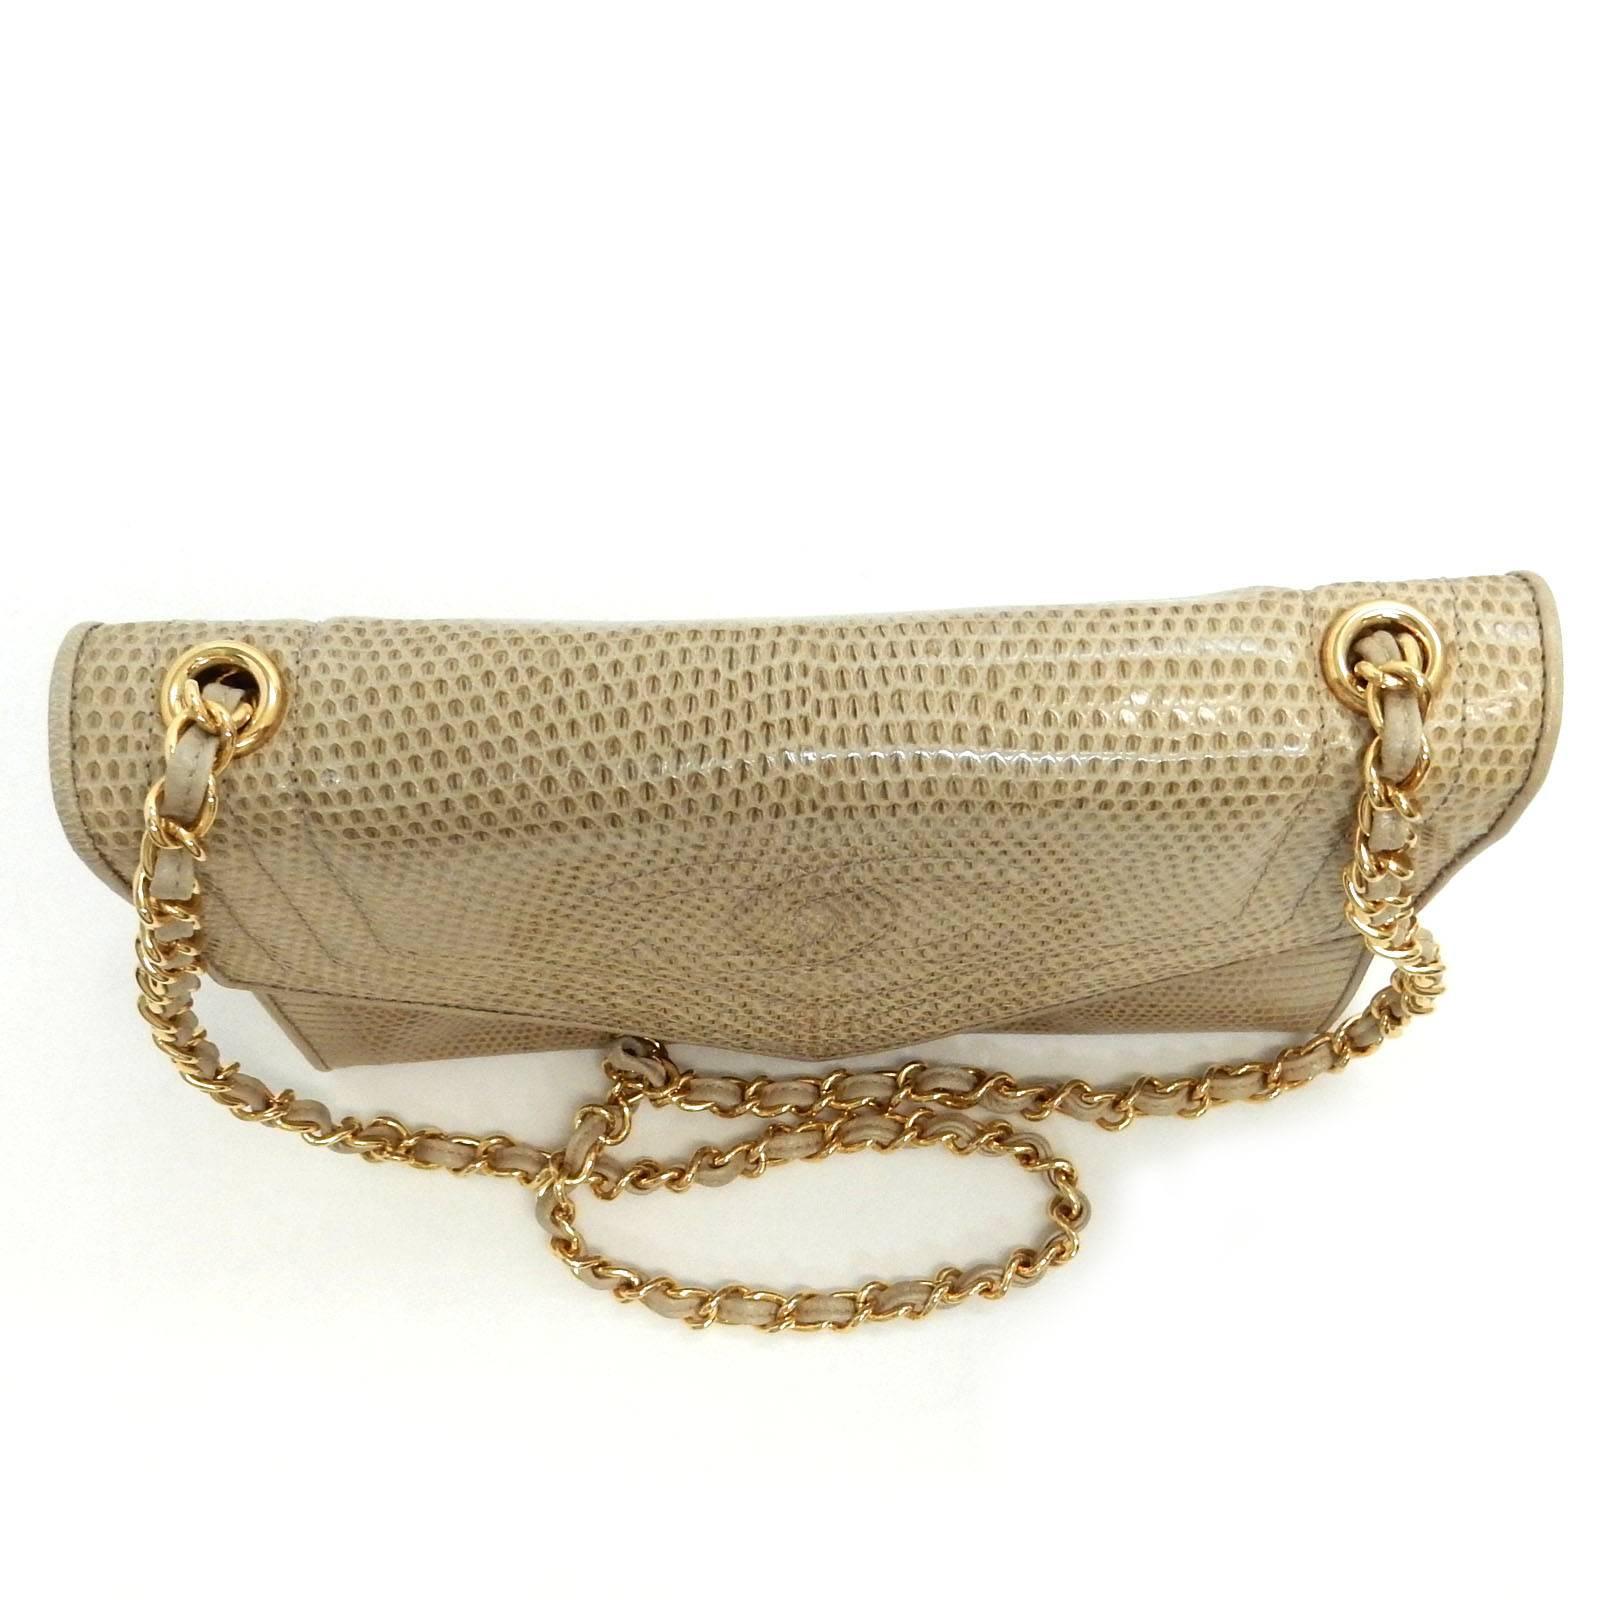 Women's Chanel Ivory and Beige Lizard Leather Flap with Gold Chain Strap Shoulder Bag 